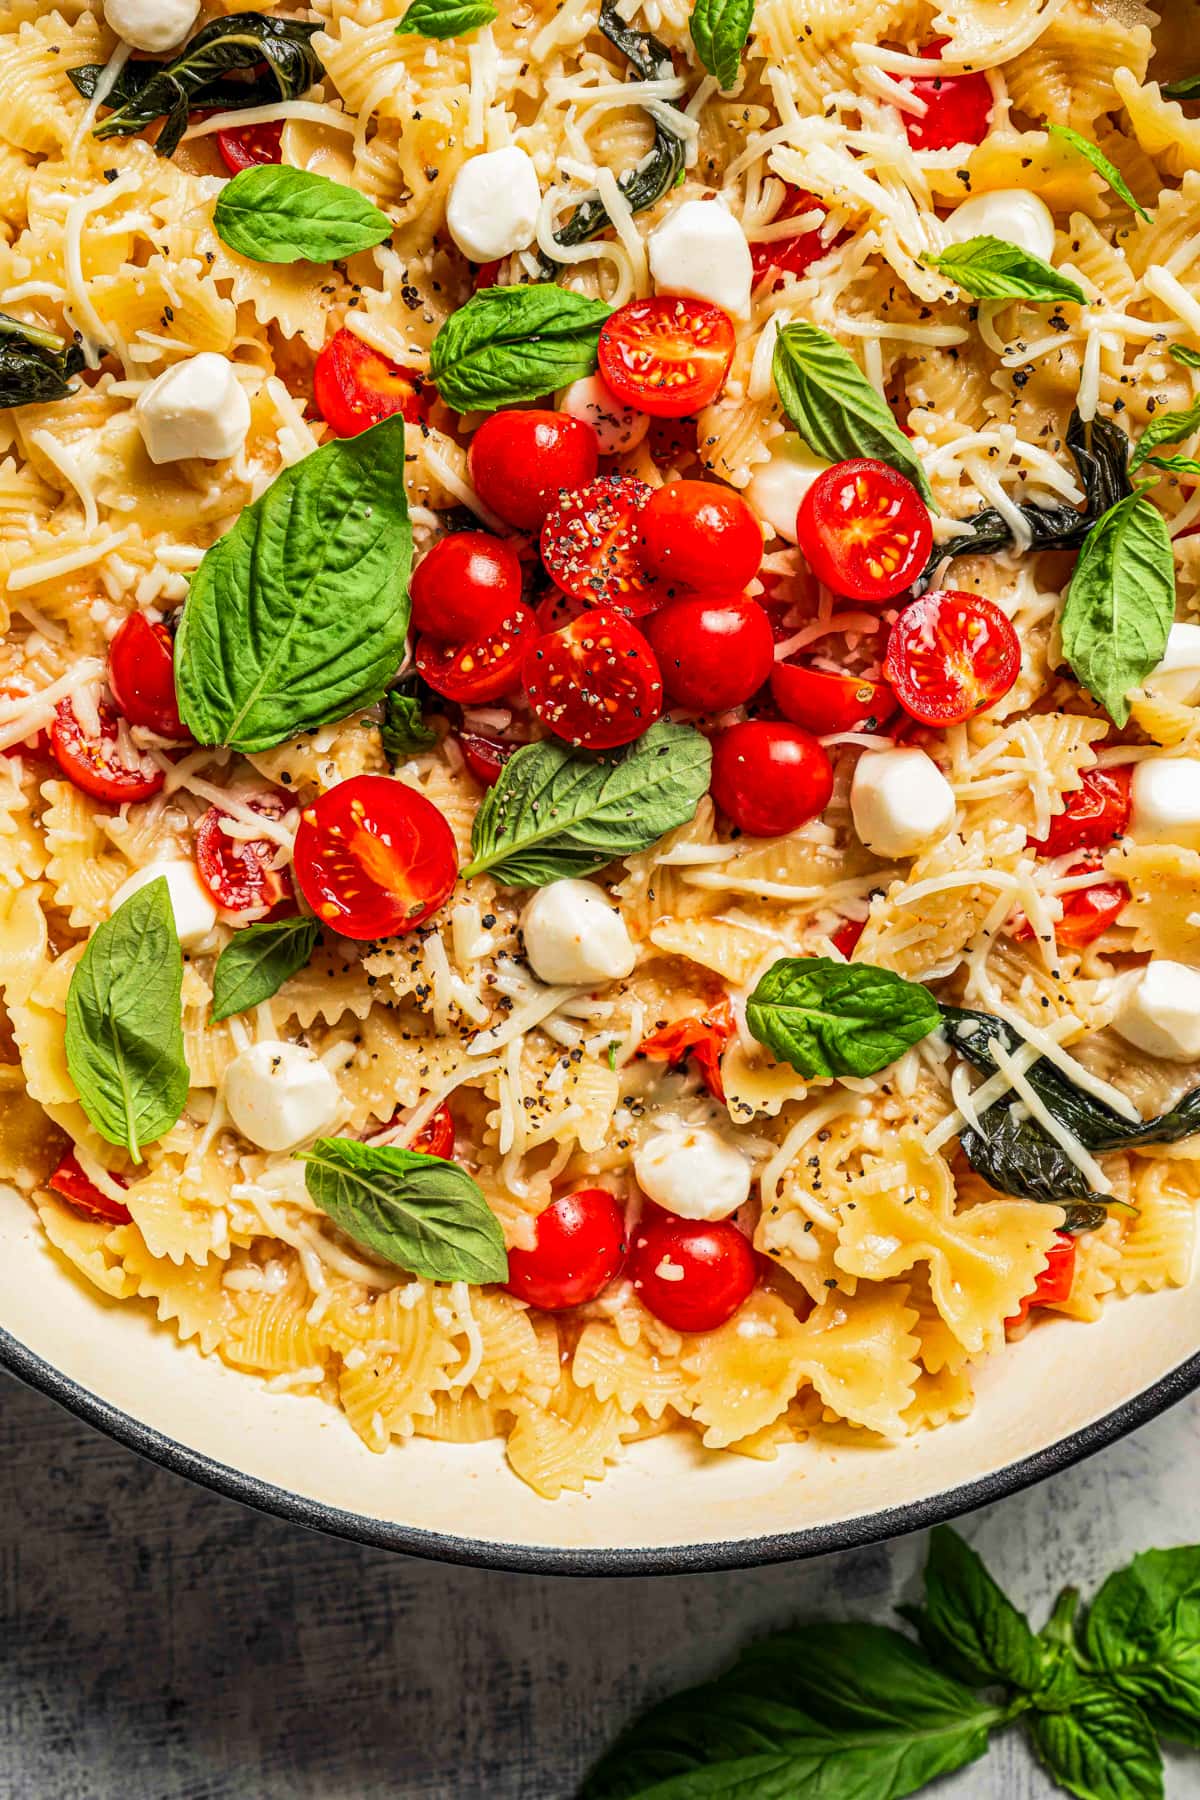 Close-up photo of pasta mixed with tomatoes, cheese balls, and basil leaves.